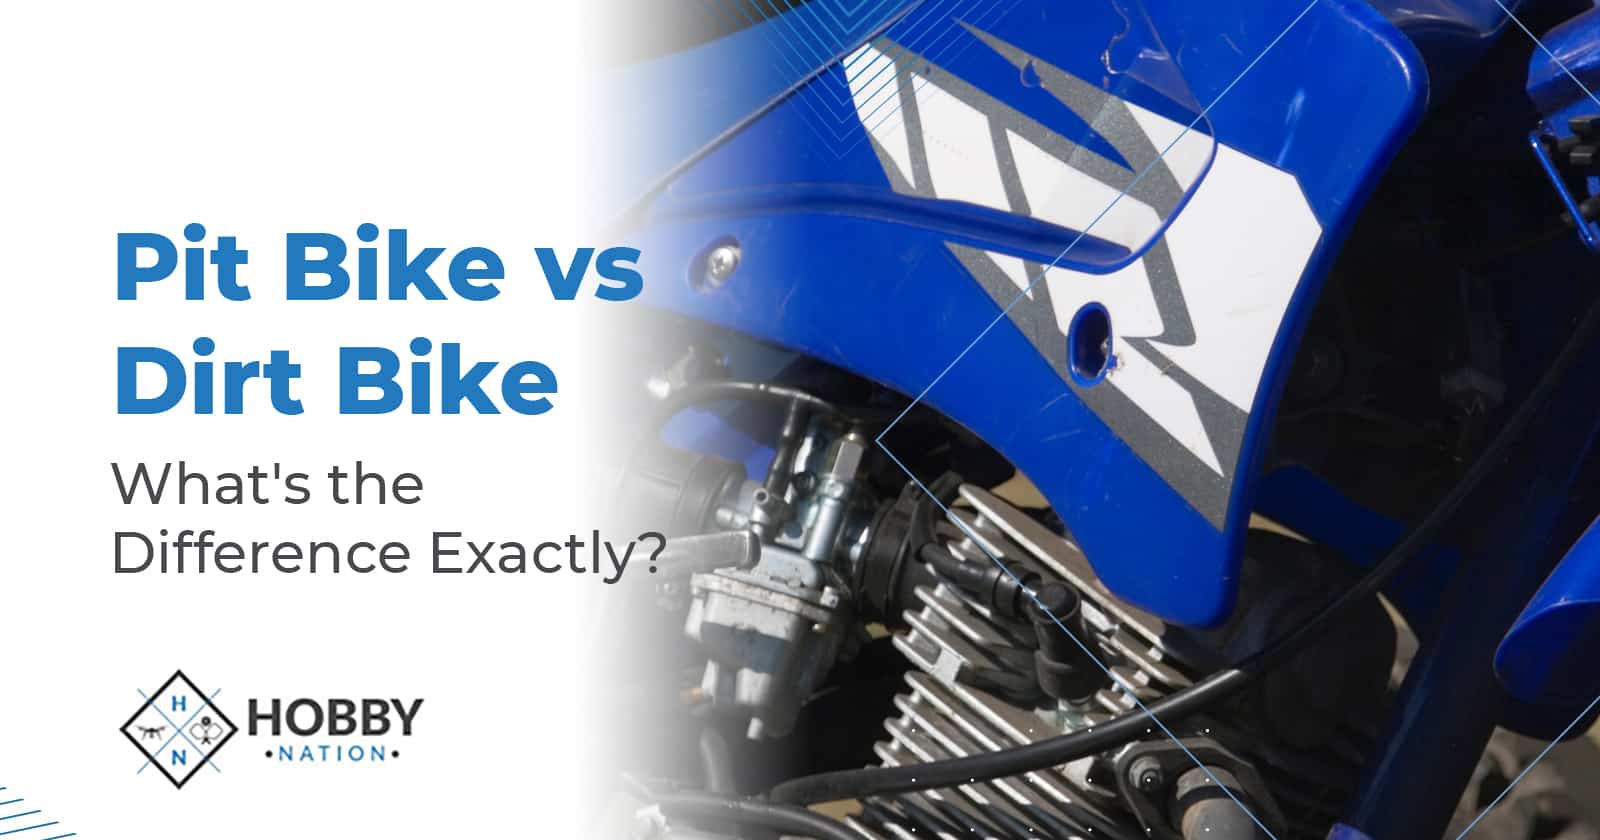 Pit Bike vs Dirt Bike – What's the Difference Exactly?